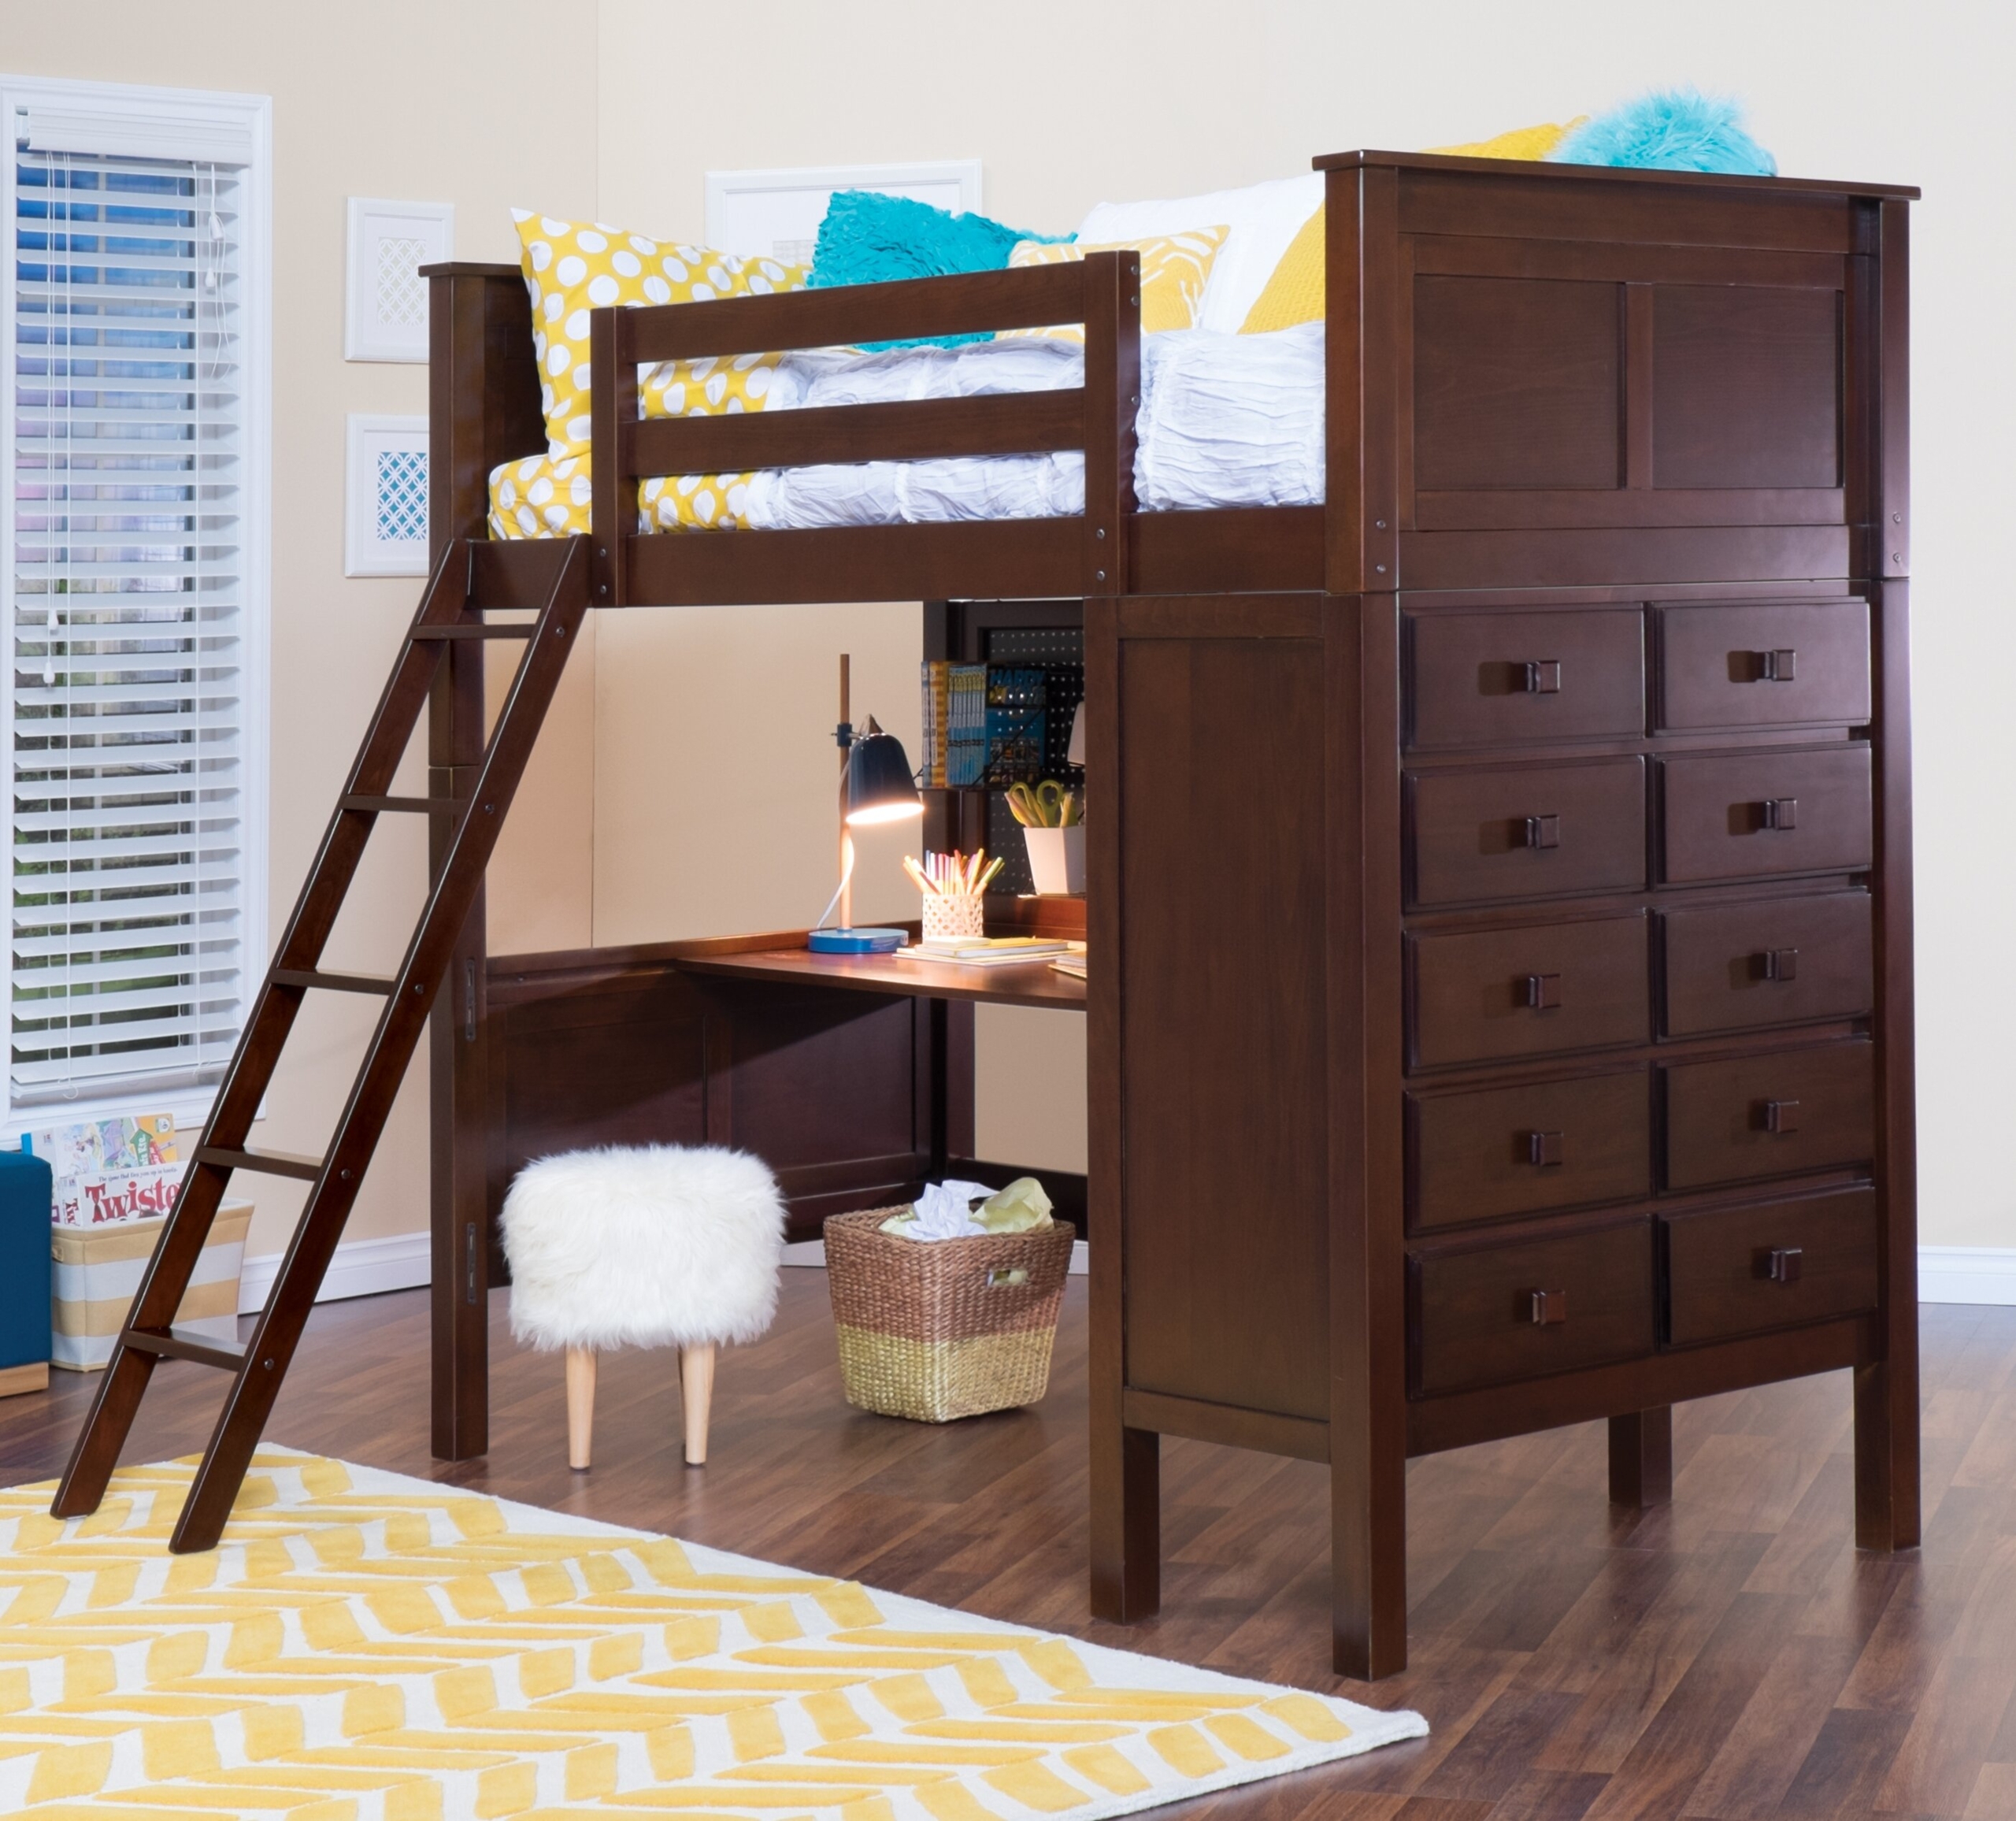 Bunk Beds With Dressers You Ll Love In 2021 Visualhunt